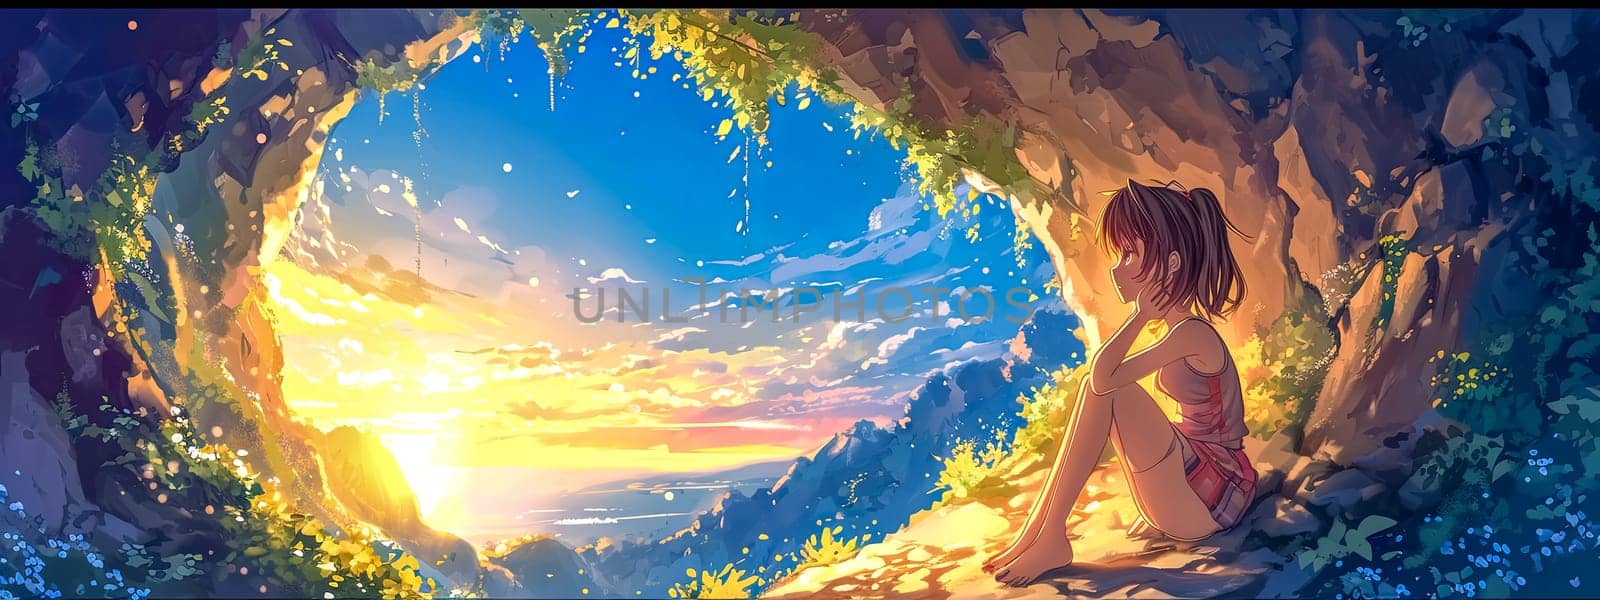 young girl sitting at the entrance of a cave, gazing out at a serene sunset, anime by Edophoto